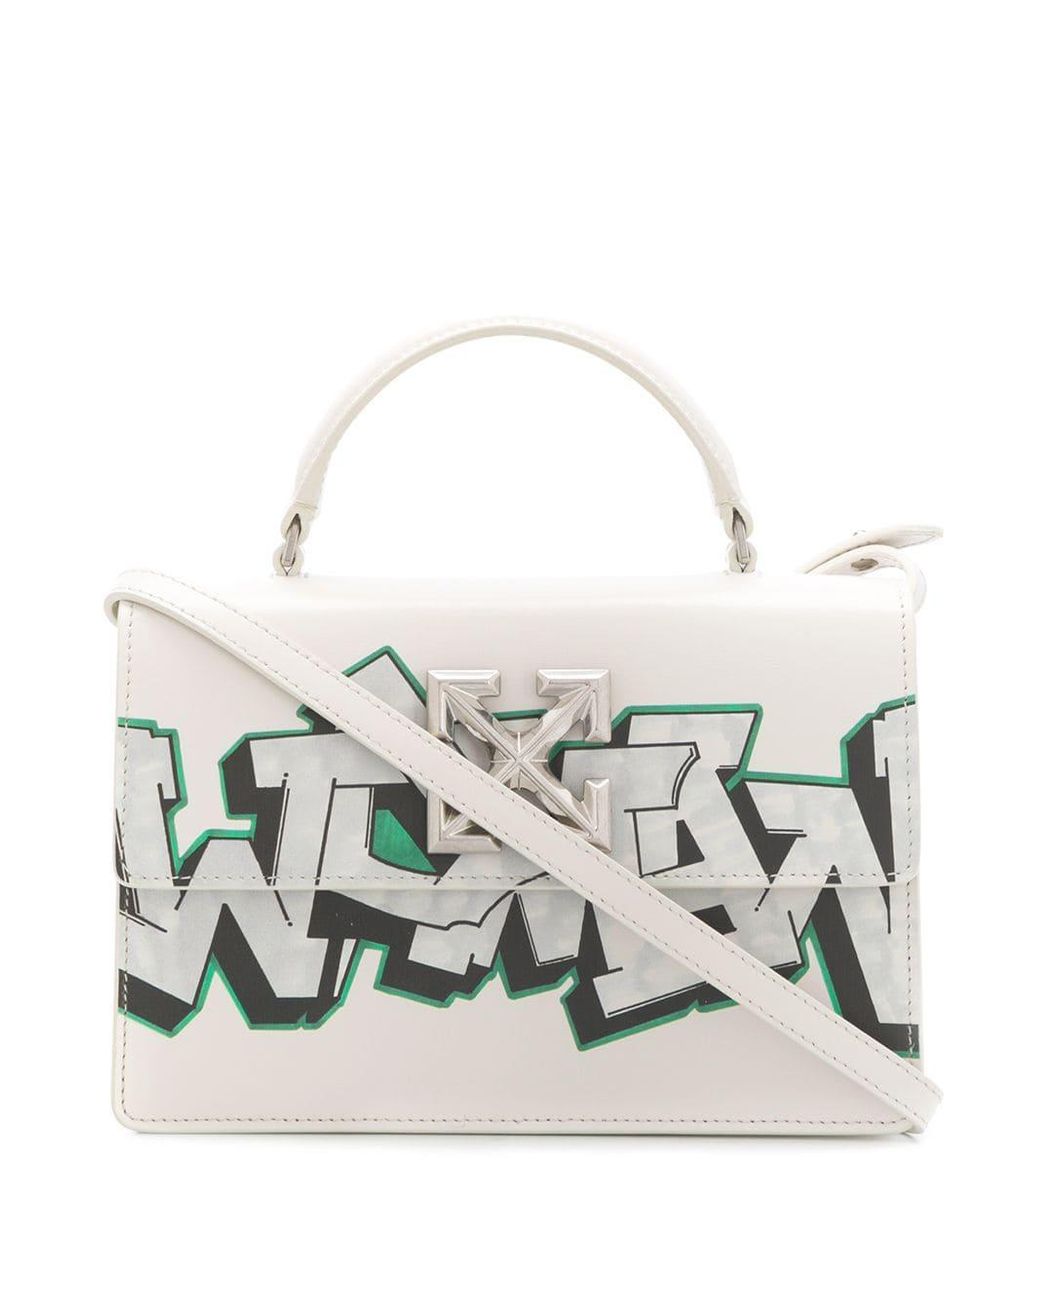 Balenciaga will tag your bag with graffiti, but of course it'll cost you